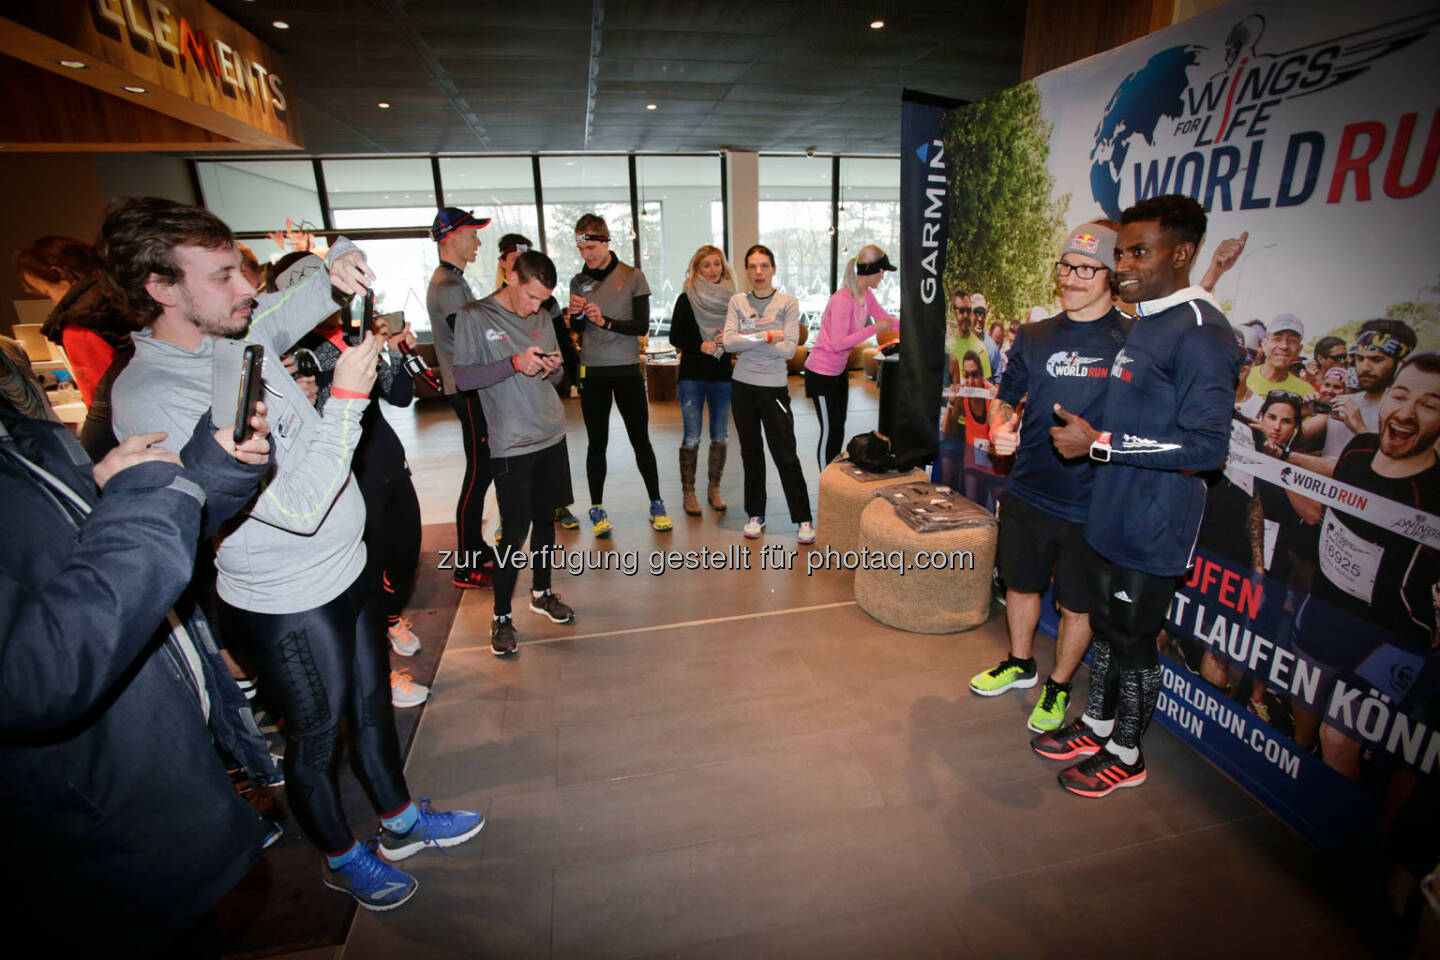 Florian Neuschwander and 
Lemawork Ketema with participants at the Wings for Life World Run event in Munich 23rd of January 2016 (Bild: Daniel Grund)